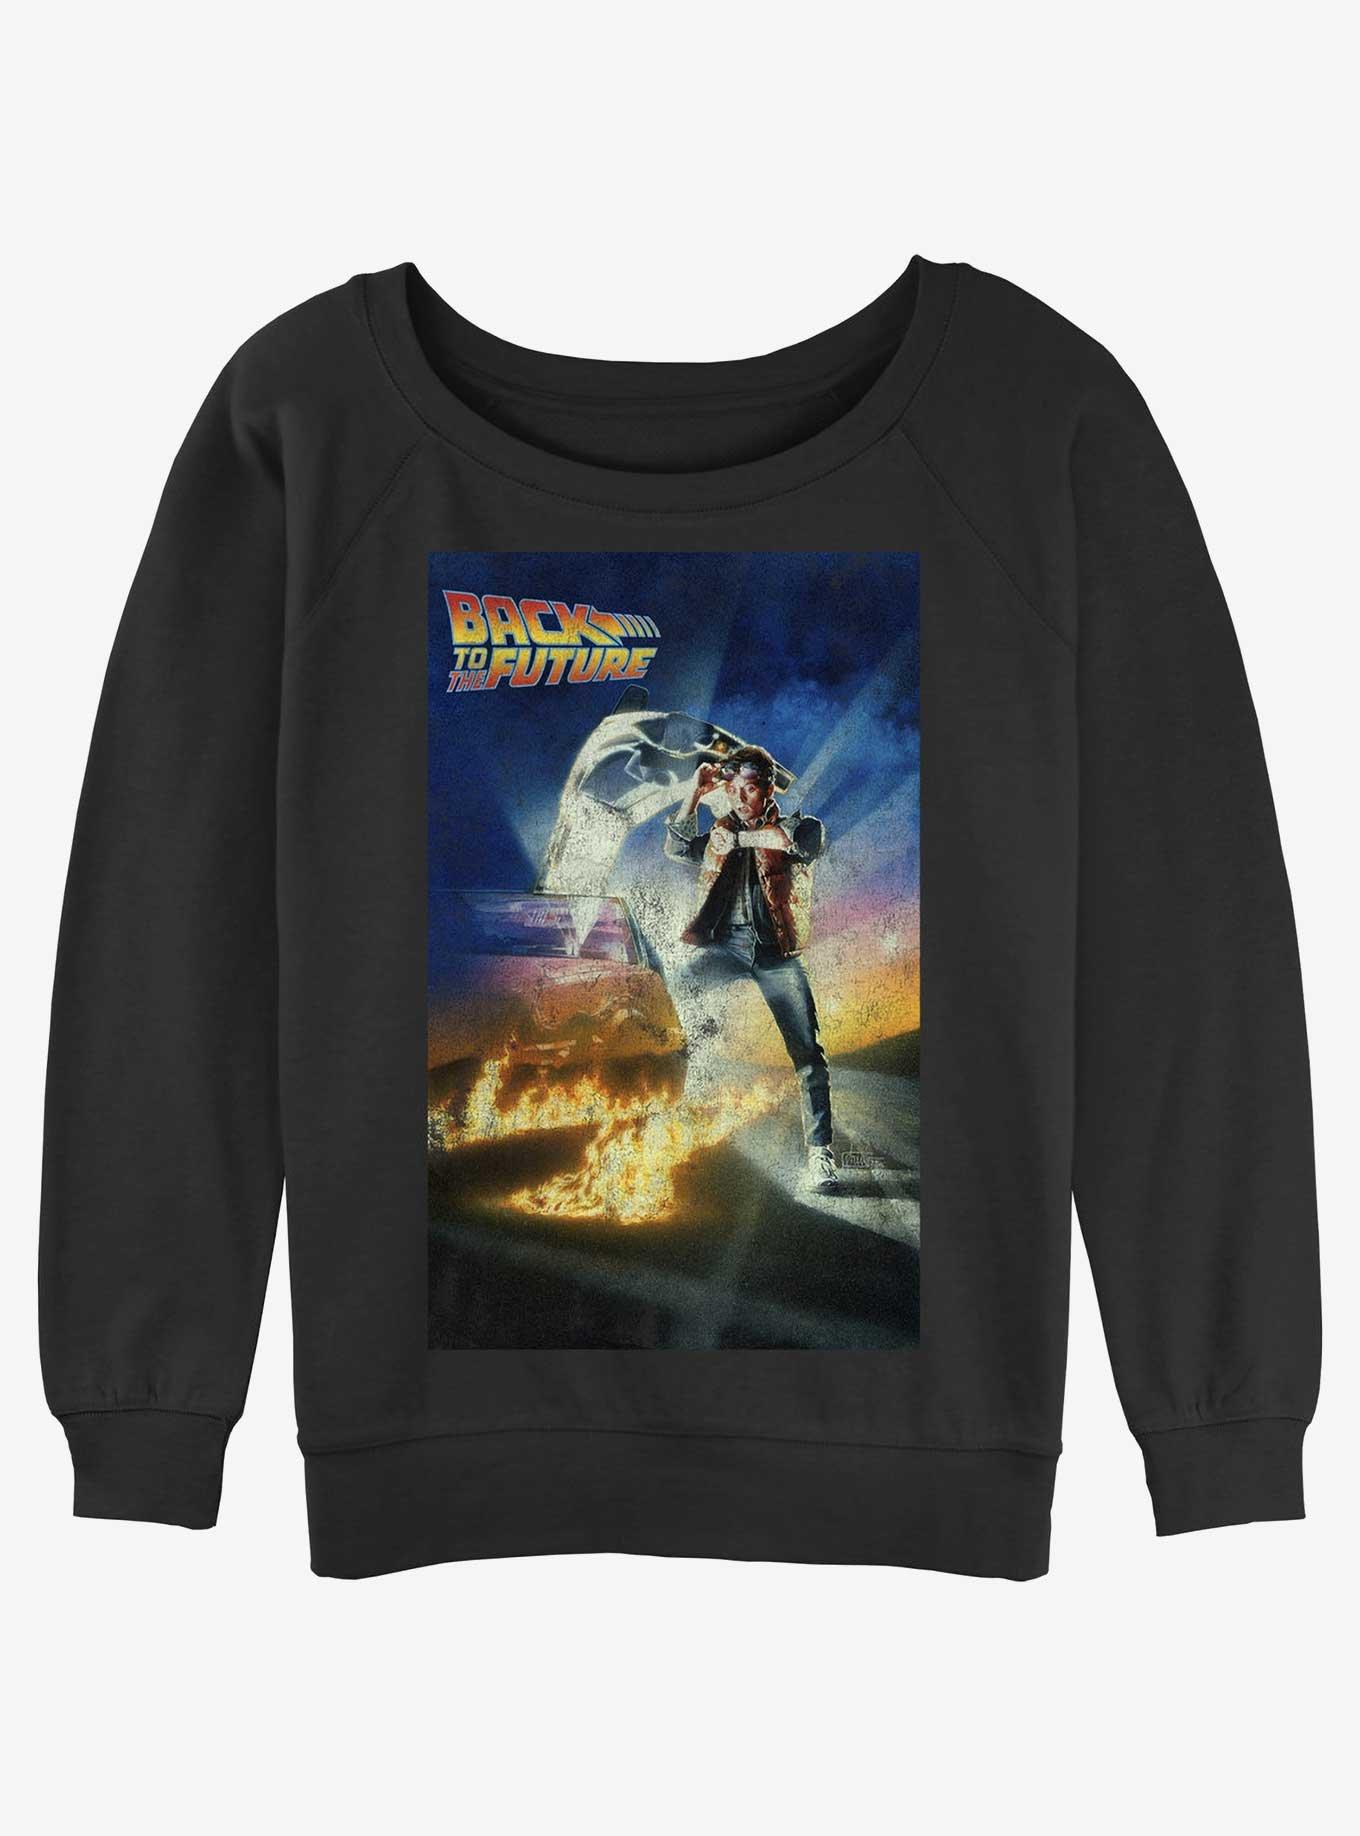 Back to the Future Classic Poster Girls Slouchy Sweatshirt